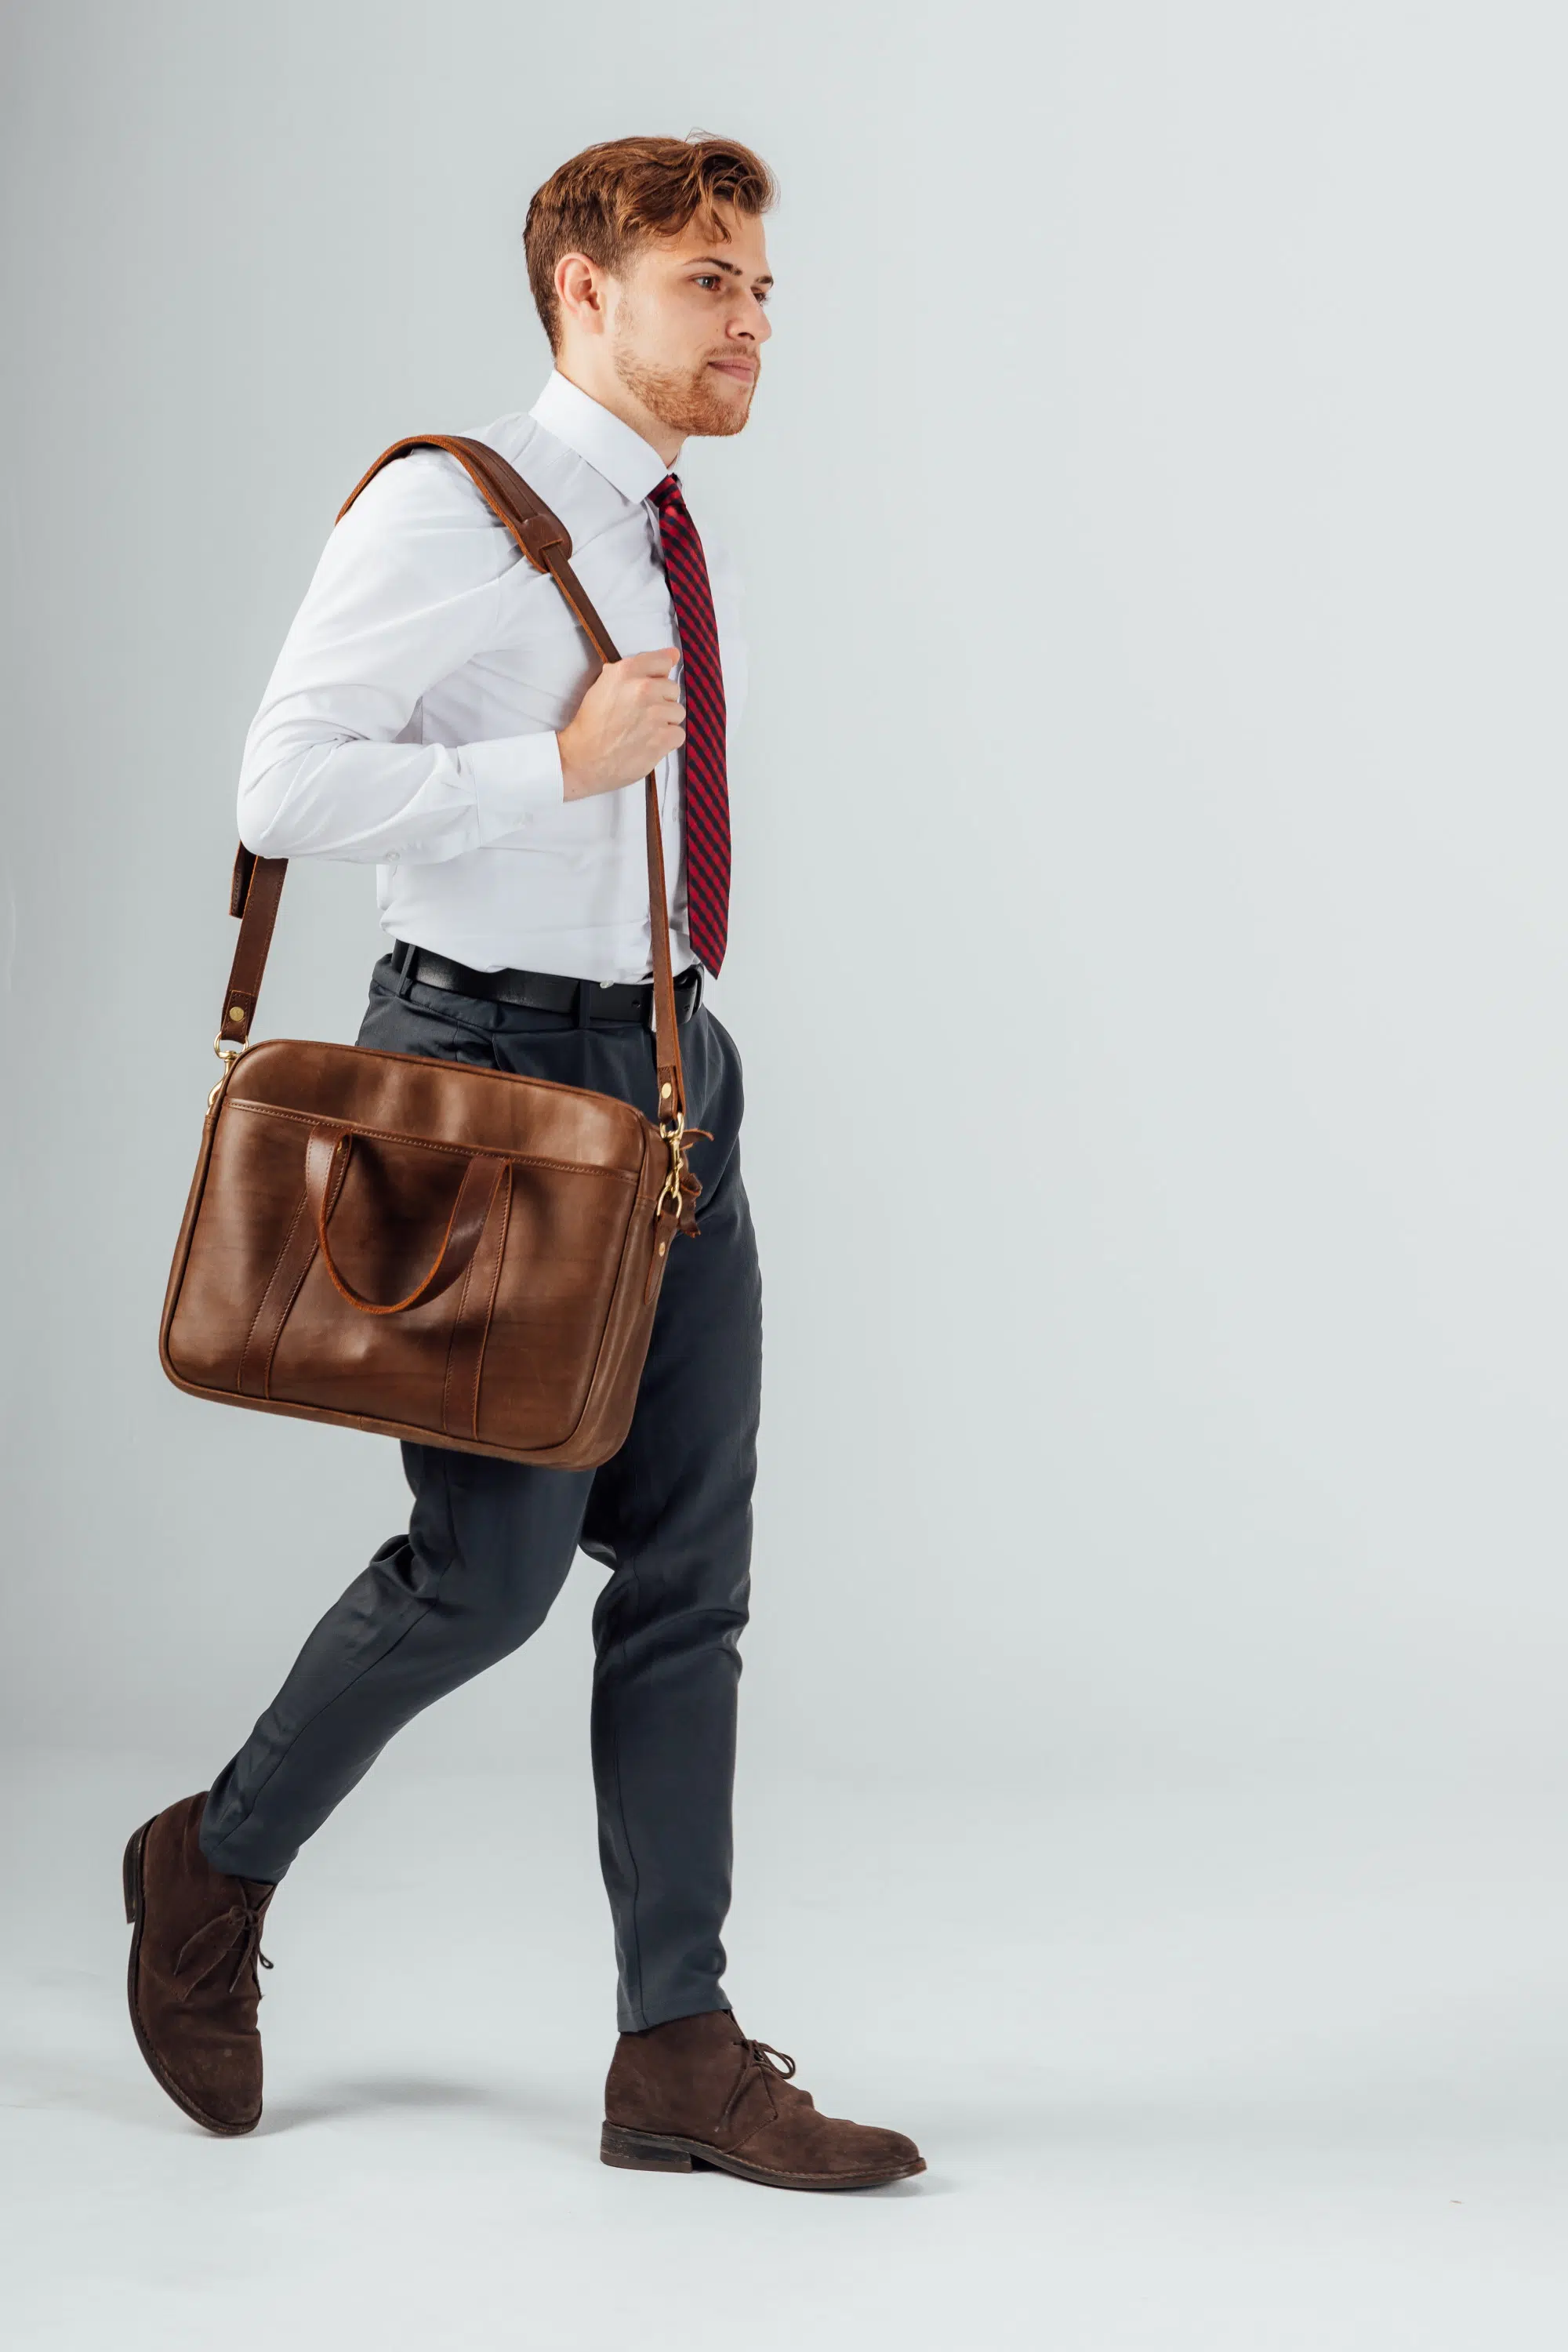 Collar and Briefcase